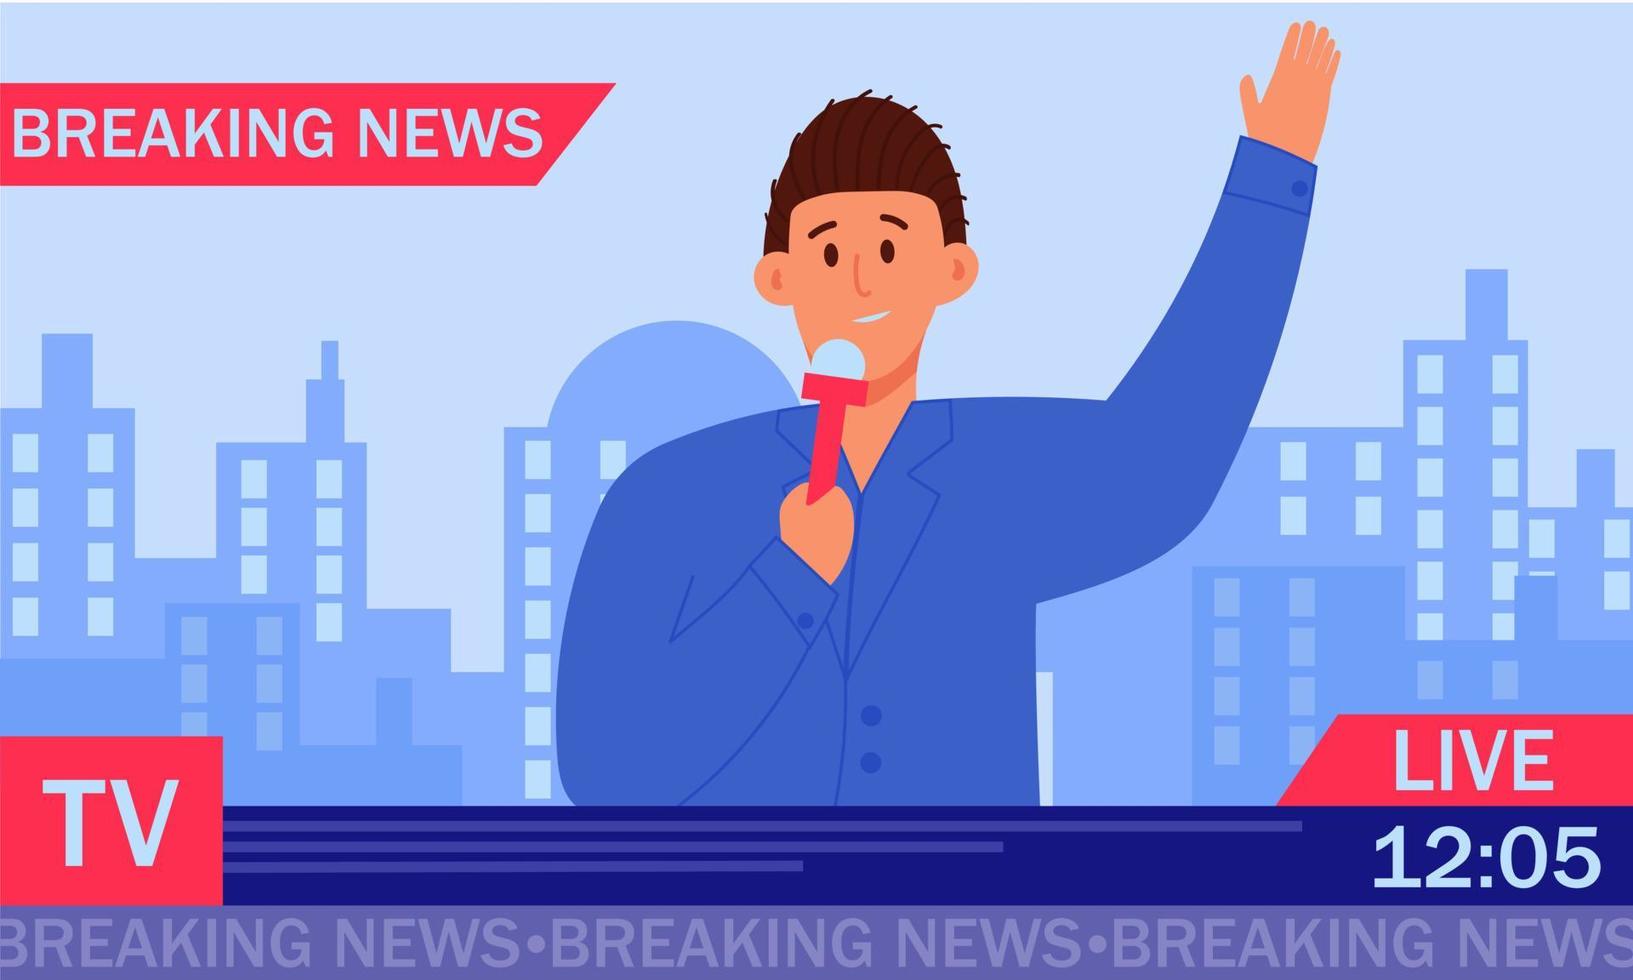 Breaking news TV presenter. Journalist with a microphone conducts a live broadcast and a man press announcer tells the news. Reporter interviews and makes a reportage vector illustration concept.